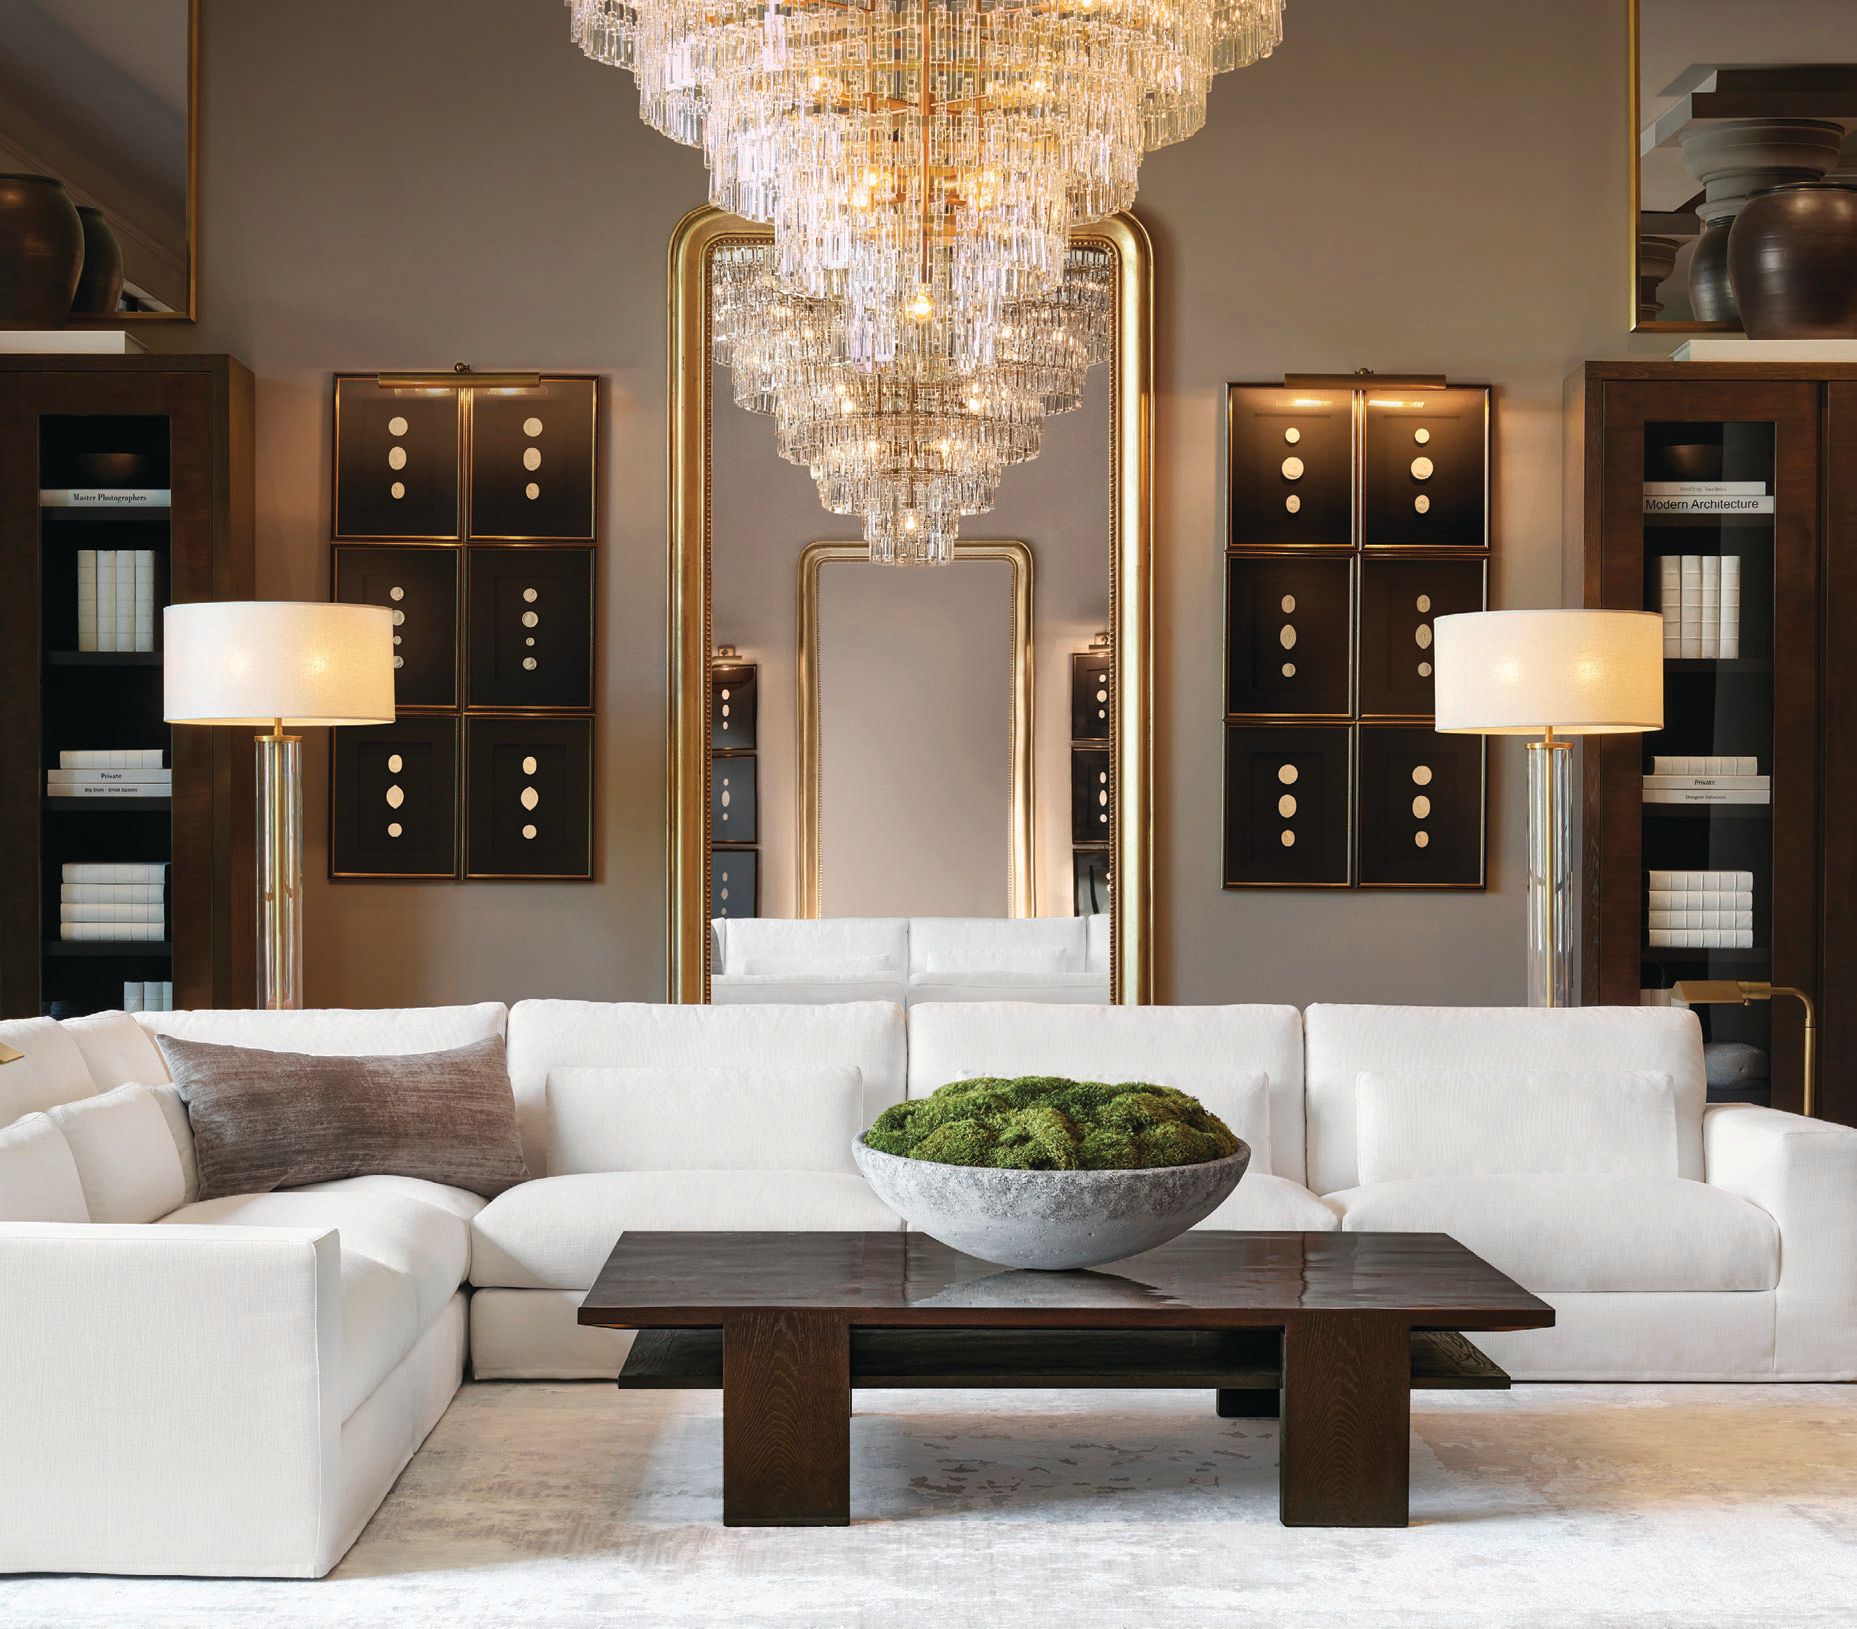 Shop myriad furniture items, including the customizable leather Lugano sectional. PHOTO COURTESY OF RH OAK BROOK